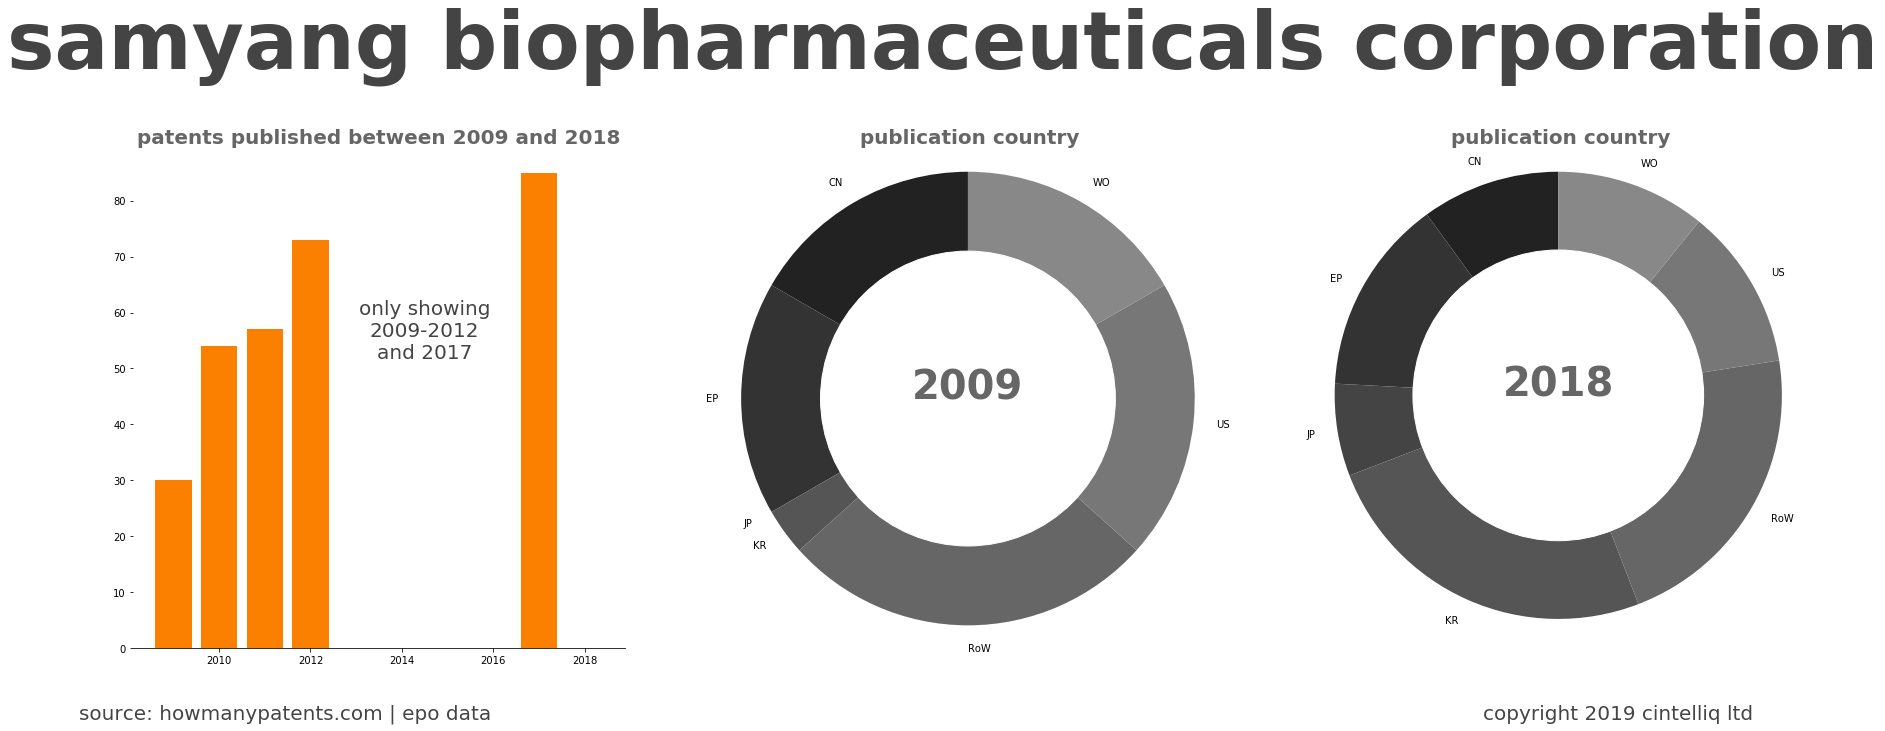 summary of patents for Samyang Biopharmaceuticals Corporation